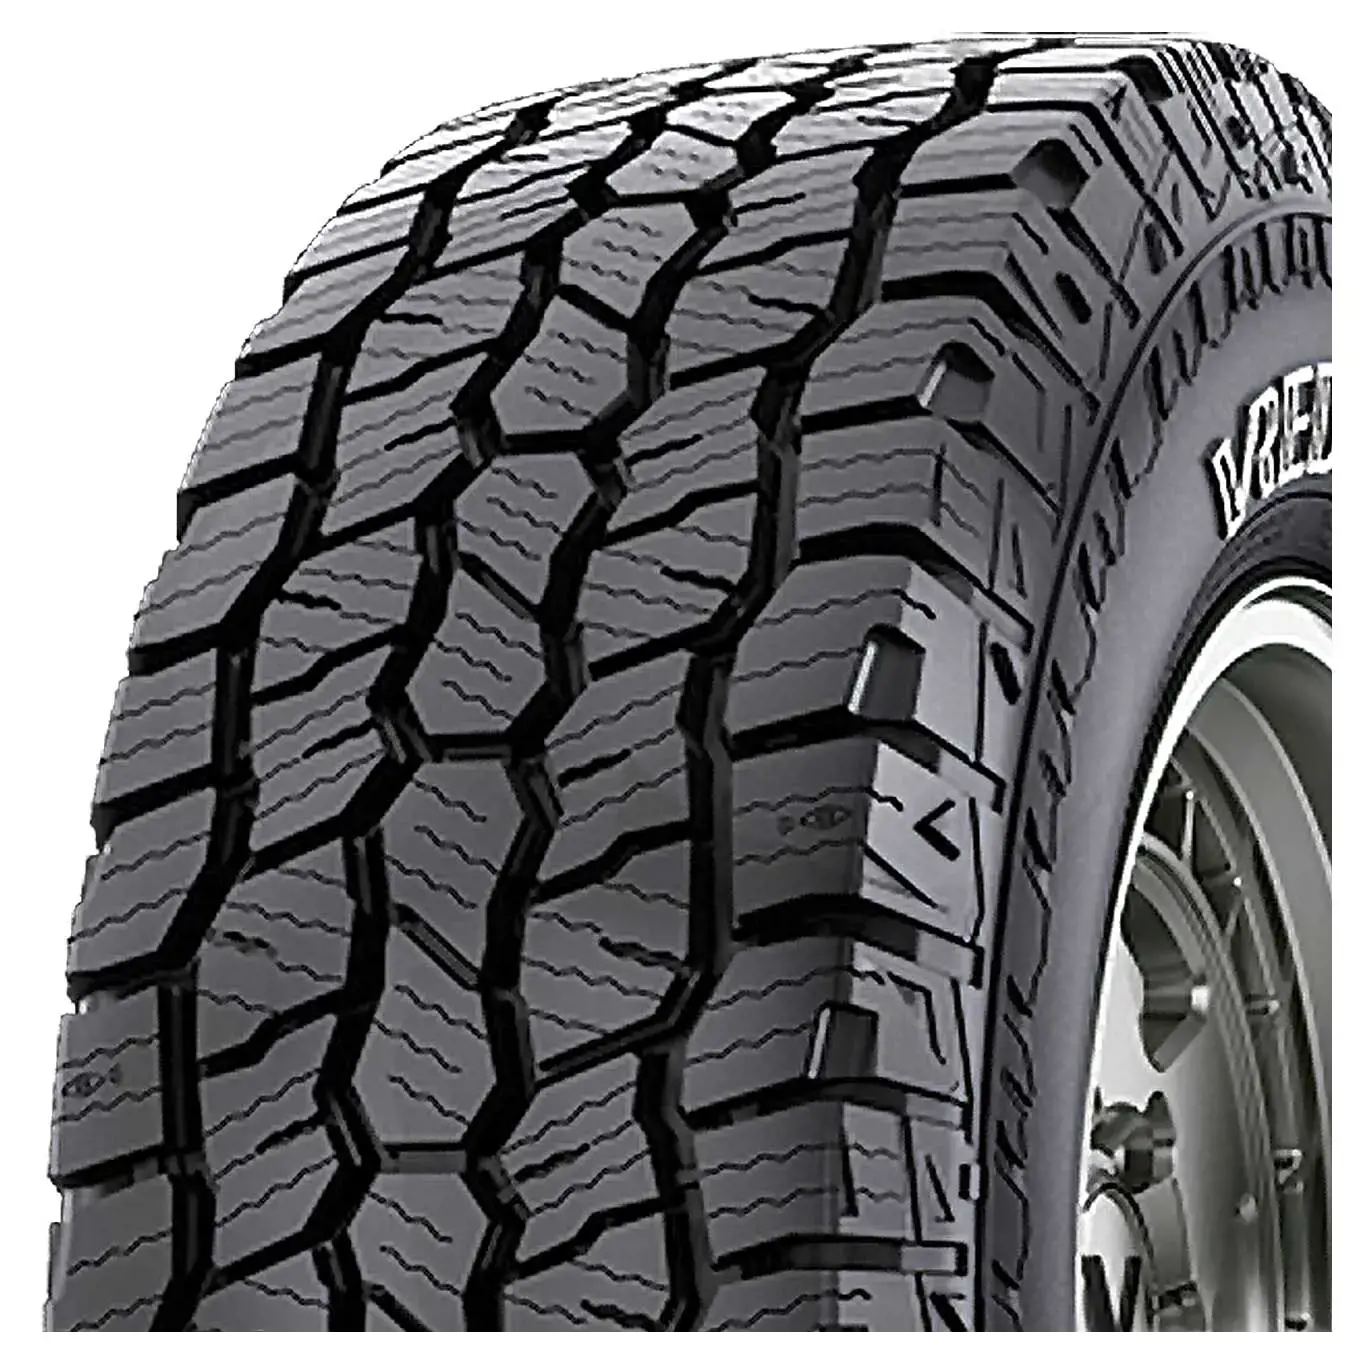 LT31x10.50 R15 109S PINZA AT BSW